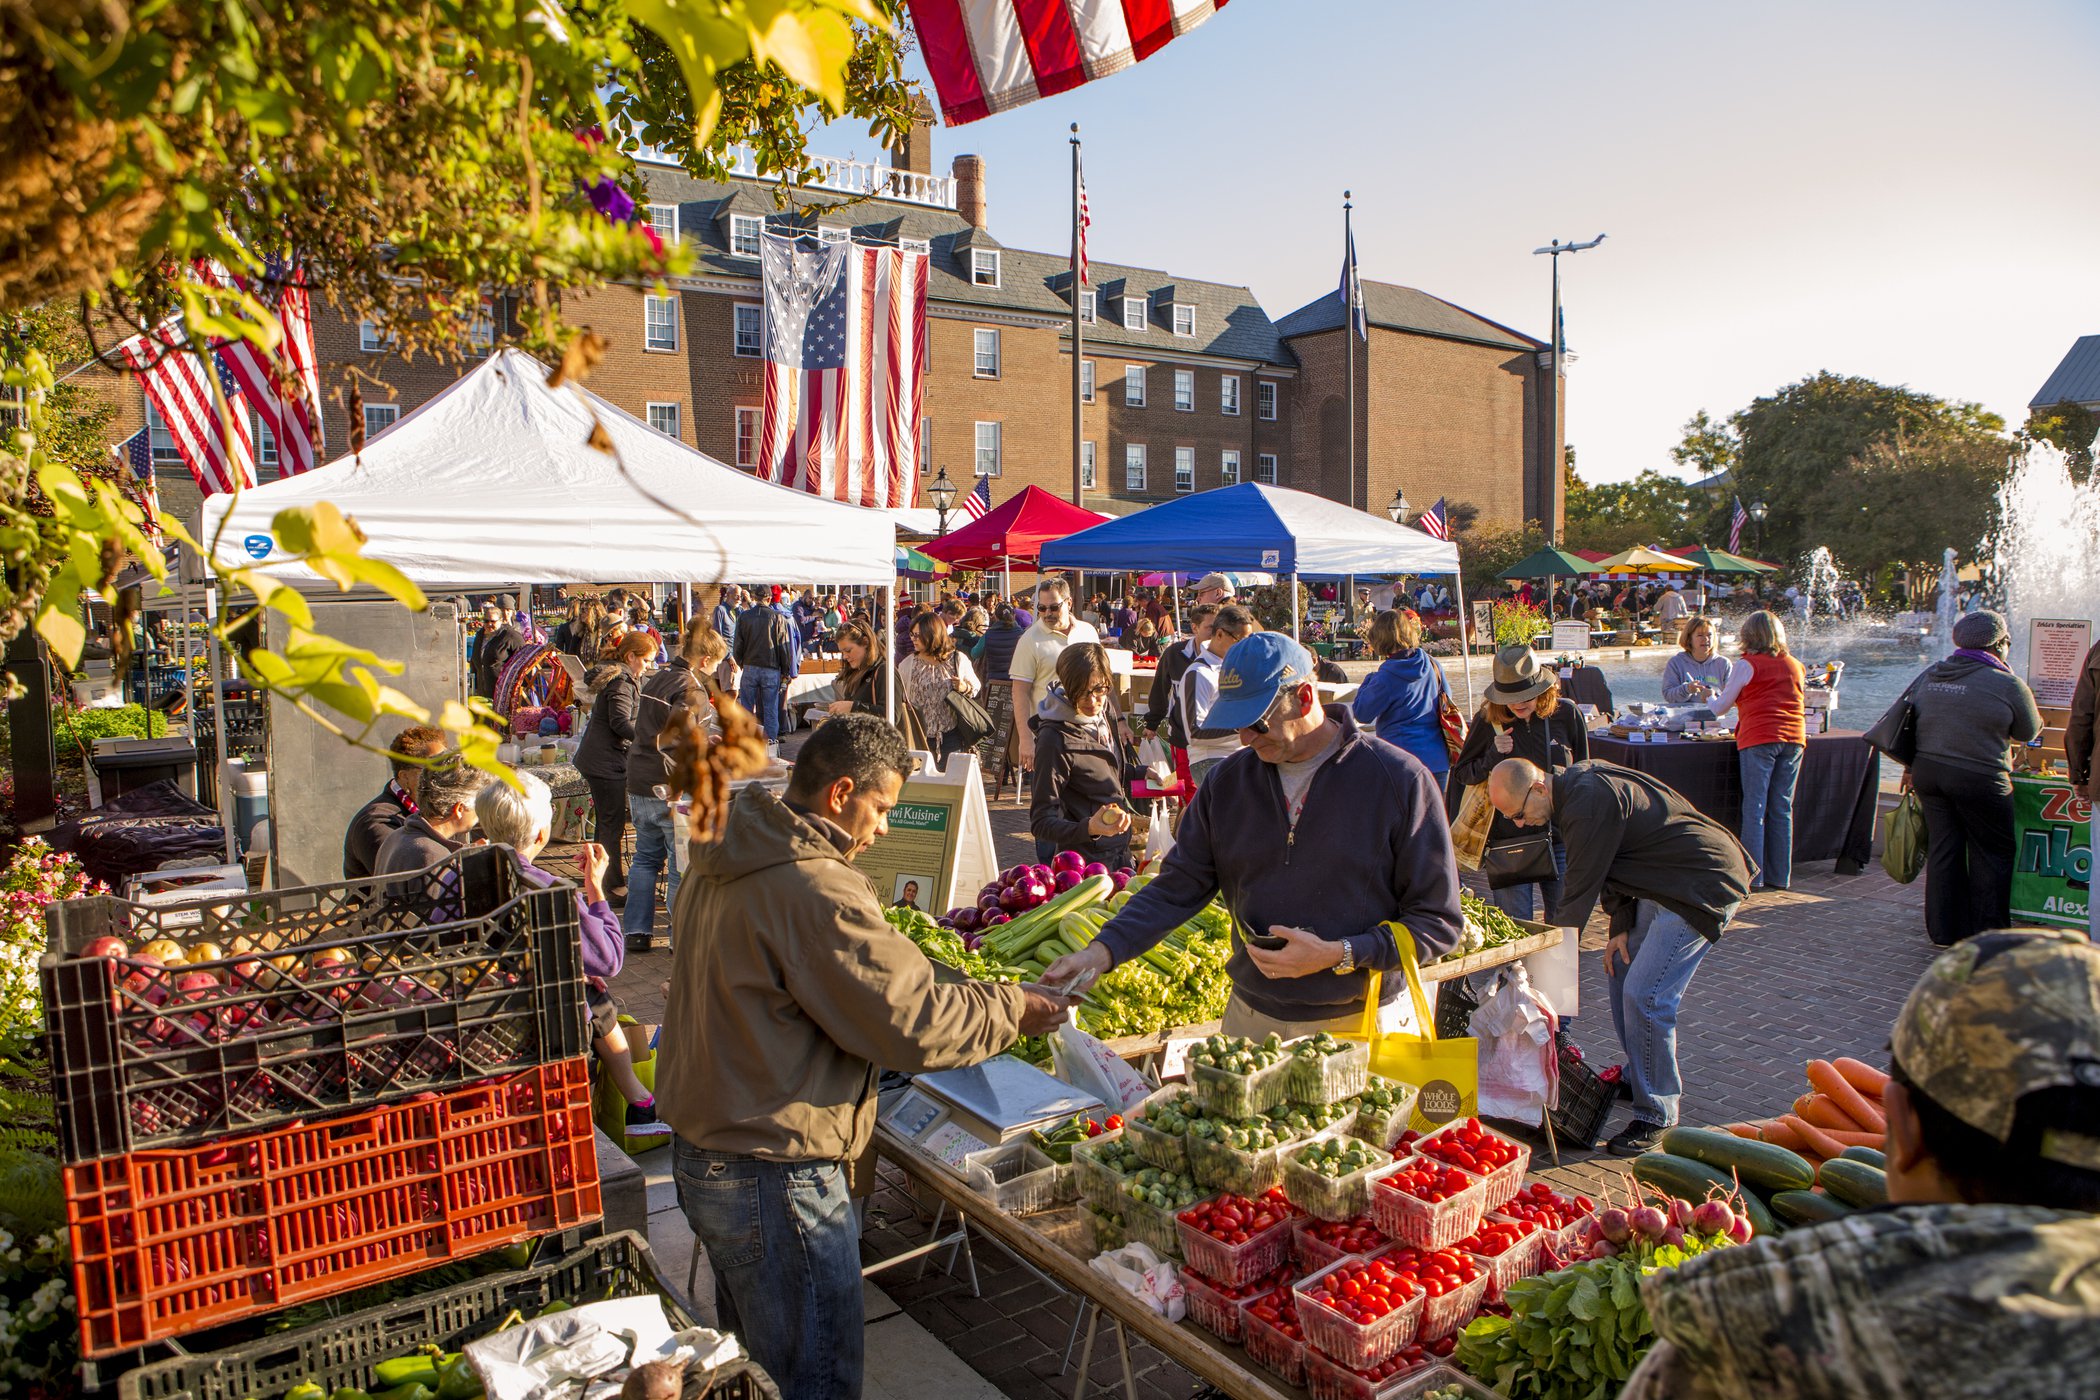 Alexandria health and nutrition coach shares her farmers market tips and  tricks